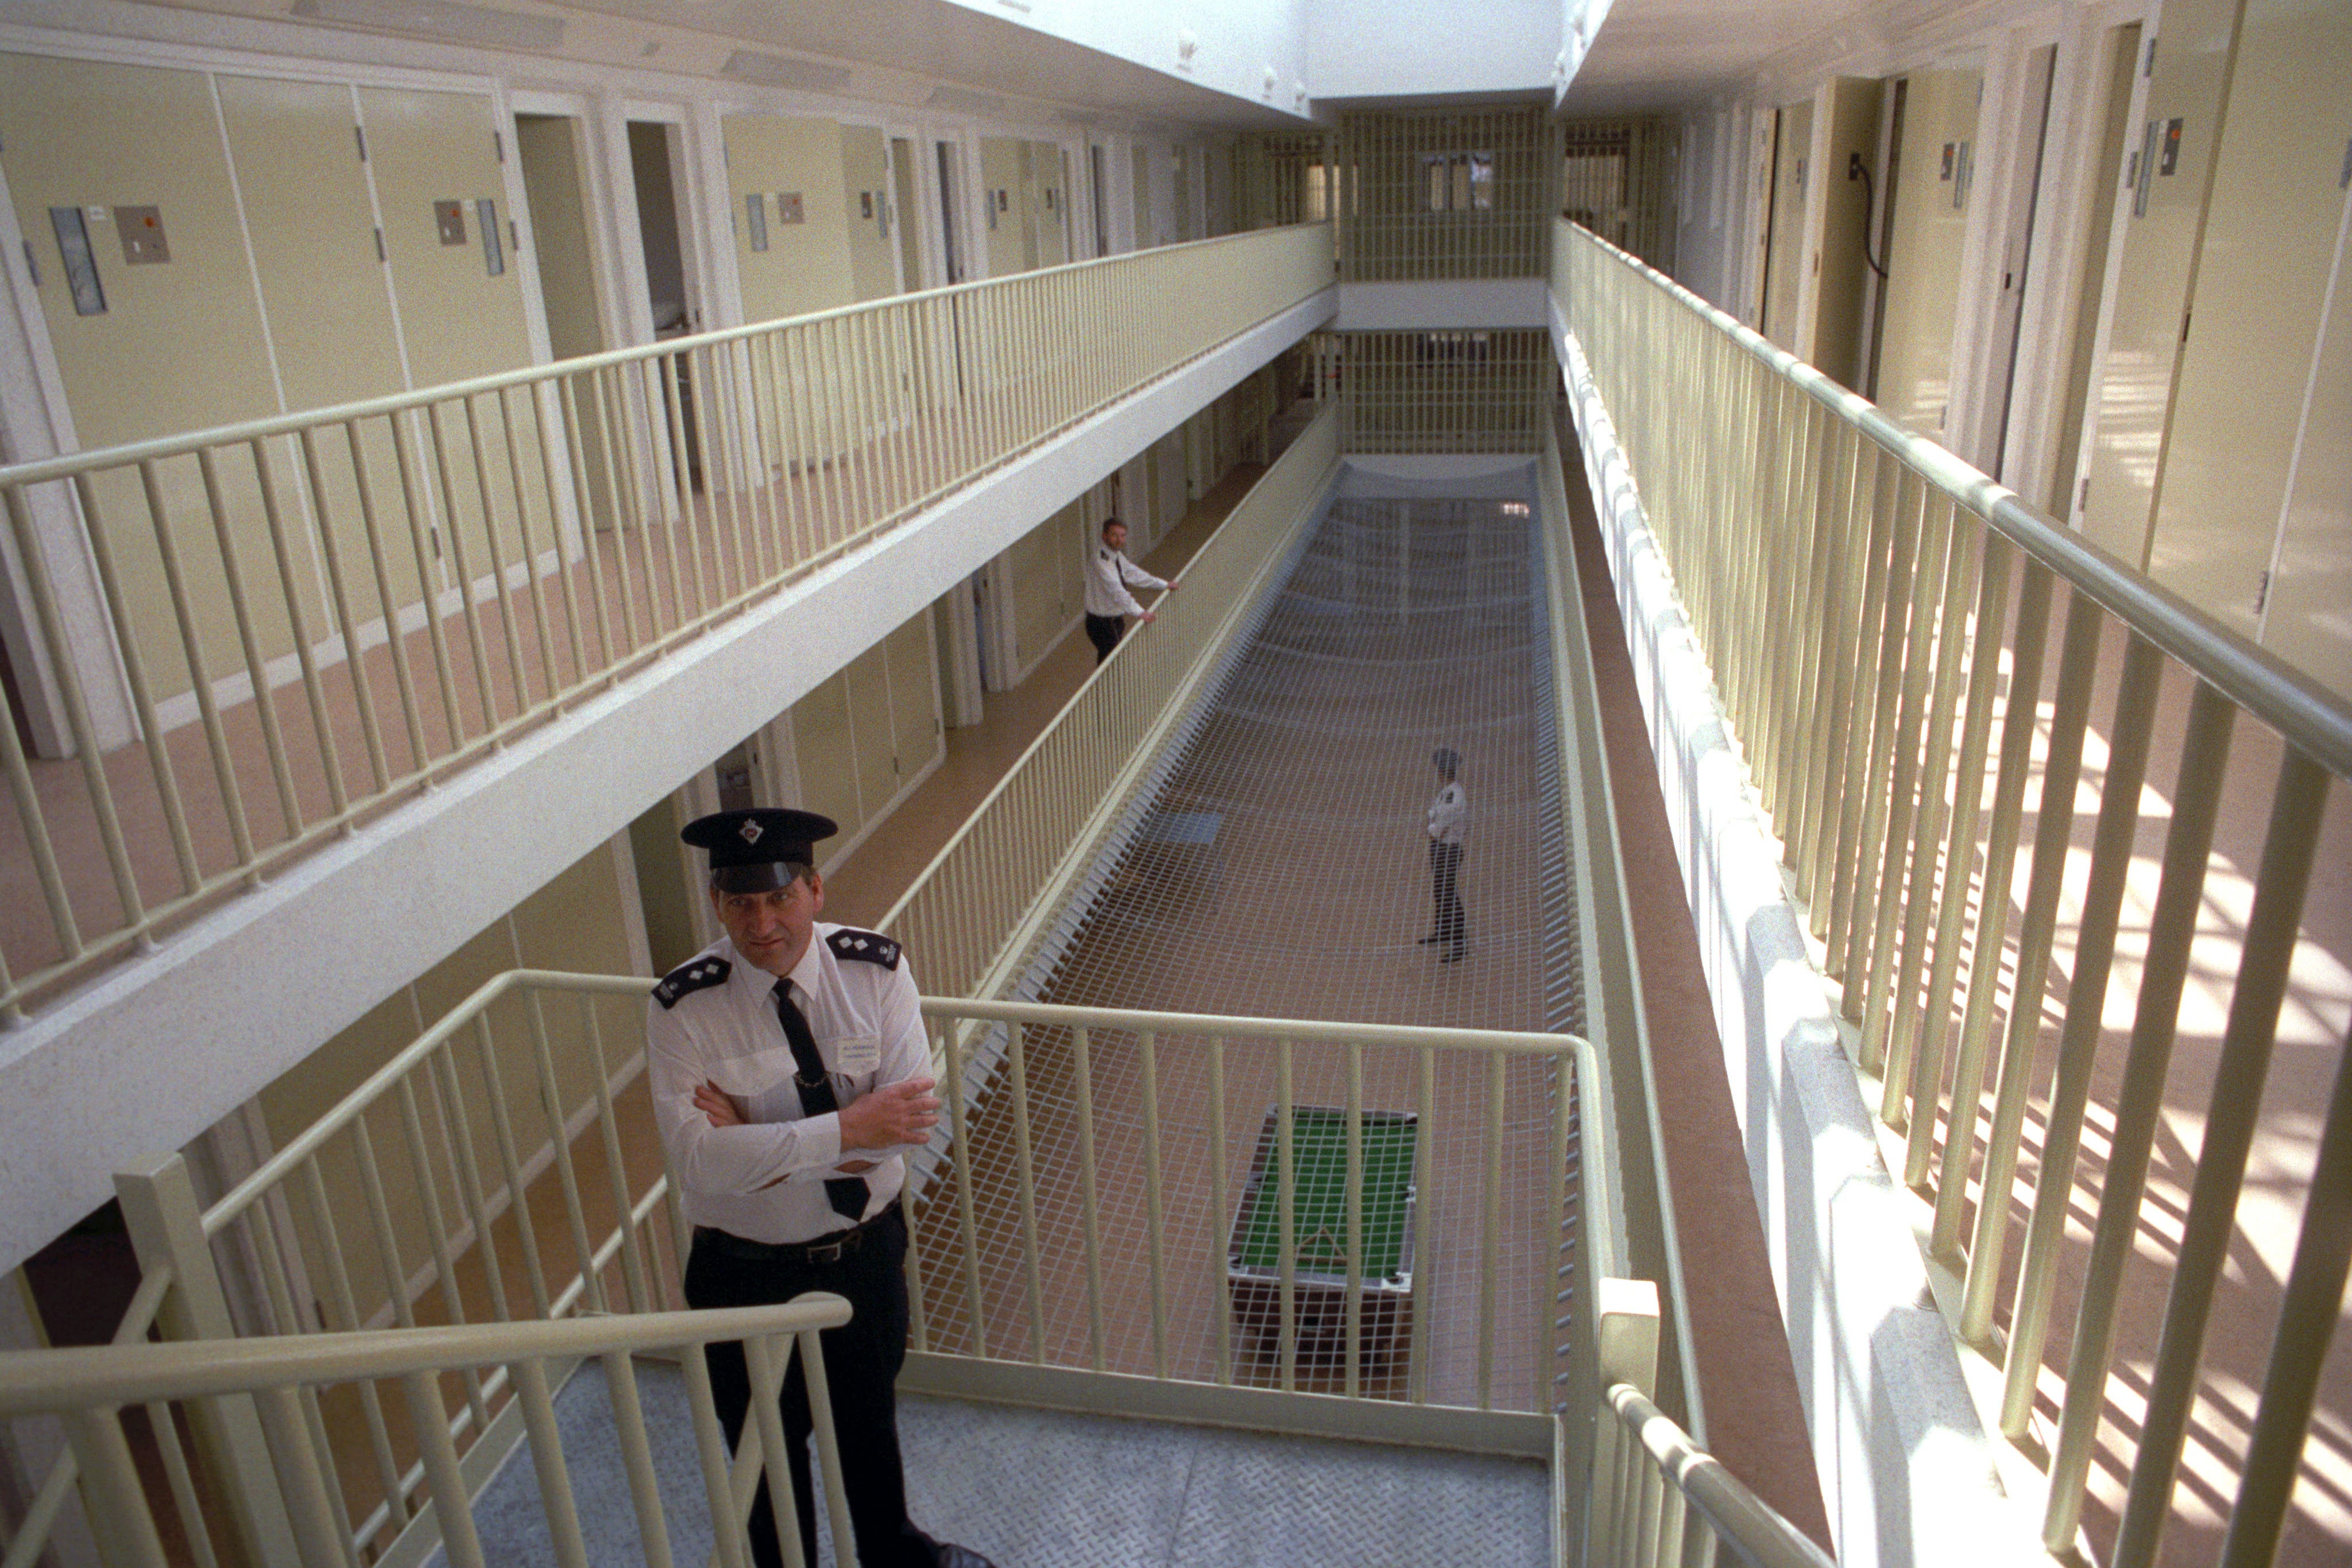 Healthcare is ‘inconsistent’ across England’s 12 women’s prisons, the review found